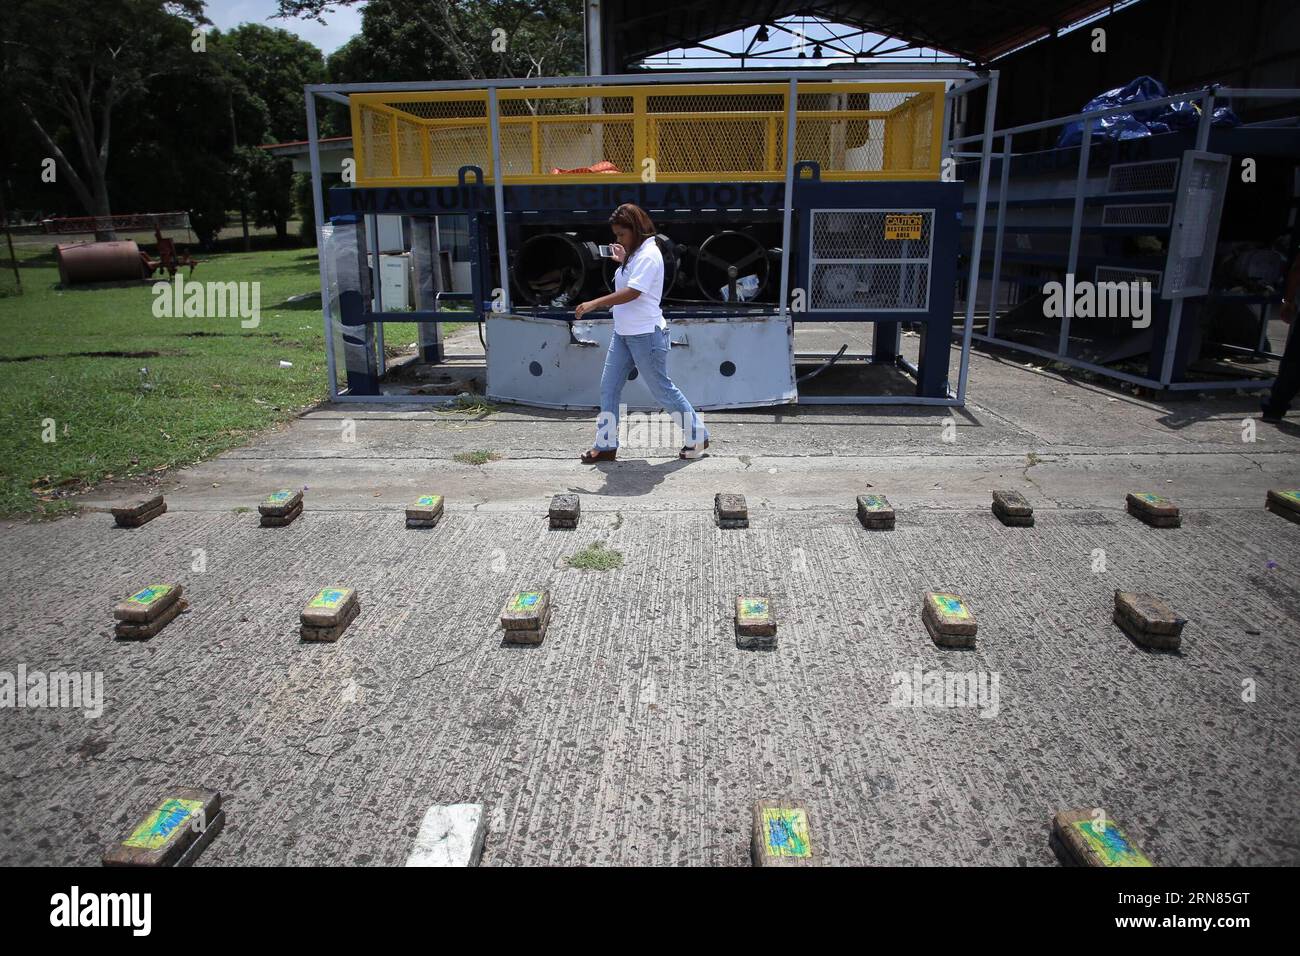 PANAMA CITY, Oct. 7, 2015 -- A woman walks near packages of drug and recycling machines during a press conference in Panama City, capital of Panama, on Oct. 7, 2015. Units of the National Police seized 552 packages of drug hidden inside two recycling machines, said the Director of Operations of the National Police Jose Rios. According to the institution, five people involved were captured, two from Panama, two Colombians and one from Haiti. ) PANAMA-PANAMA CITY-SECURITY-DRUG TRAFFICKING MauricioxValenzuela PUBLICATIONxNOTxINxCHN   Panama City OCT 7 2015 a Woman Walks Near Packages of Drug and Stock Photo